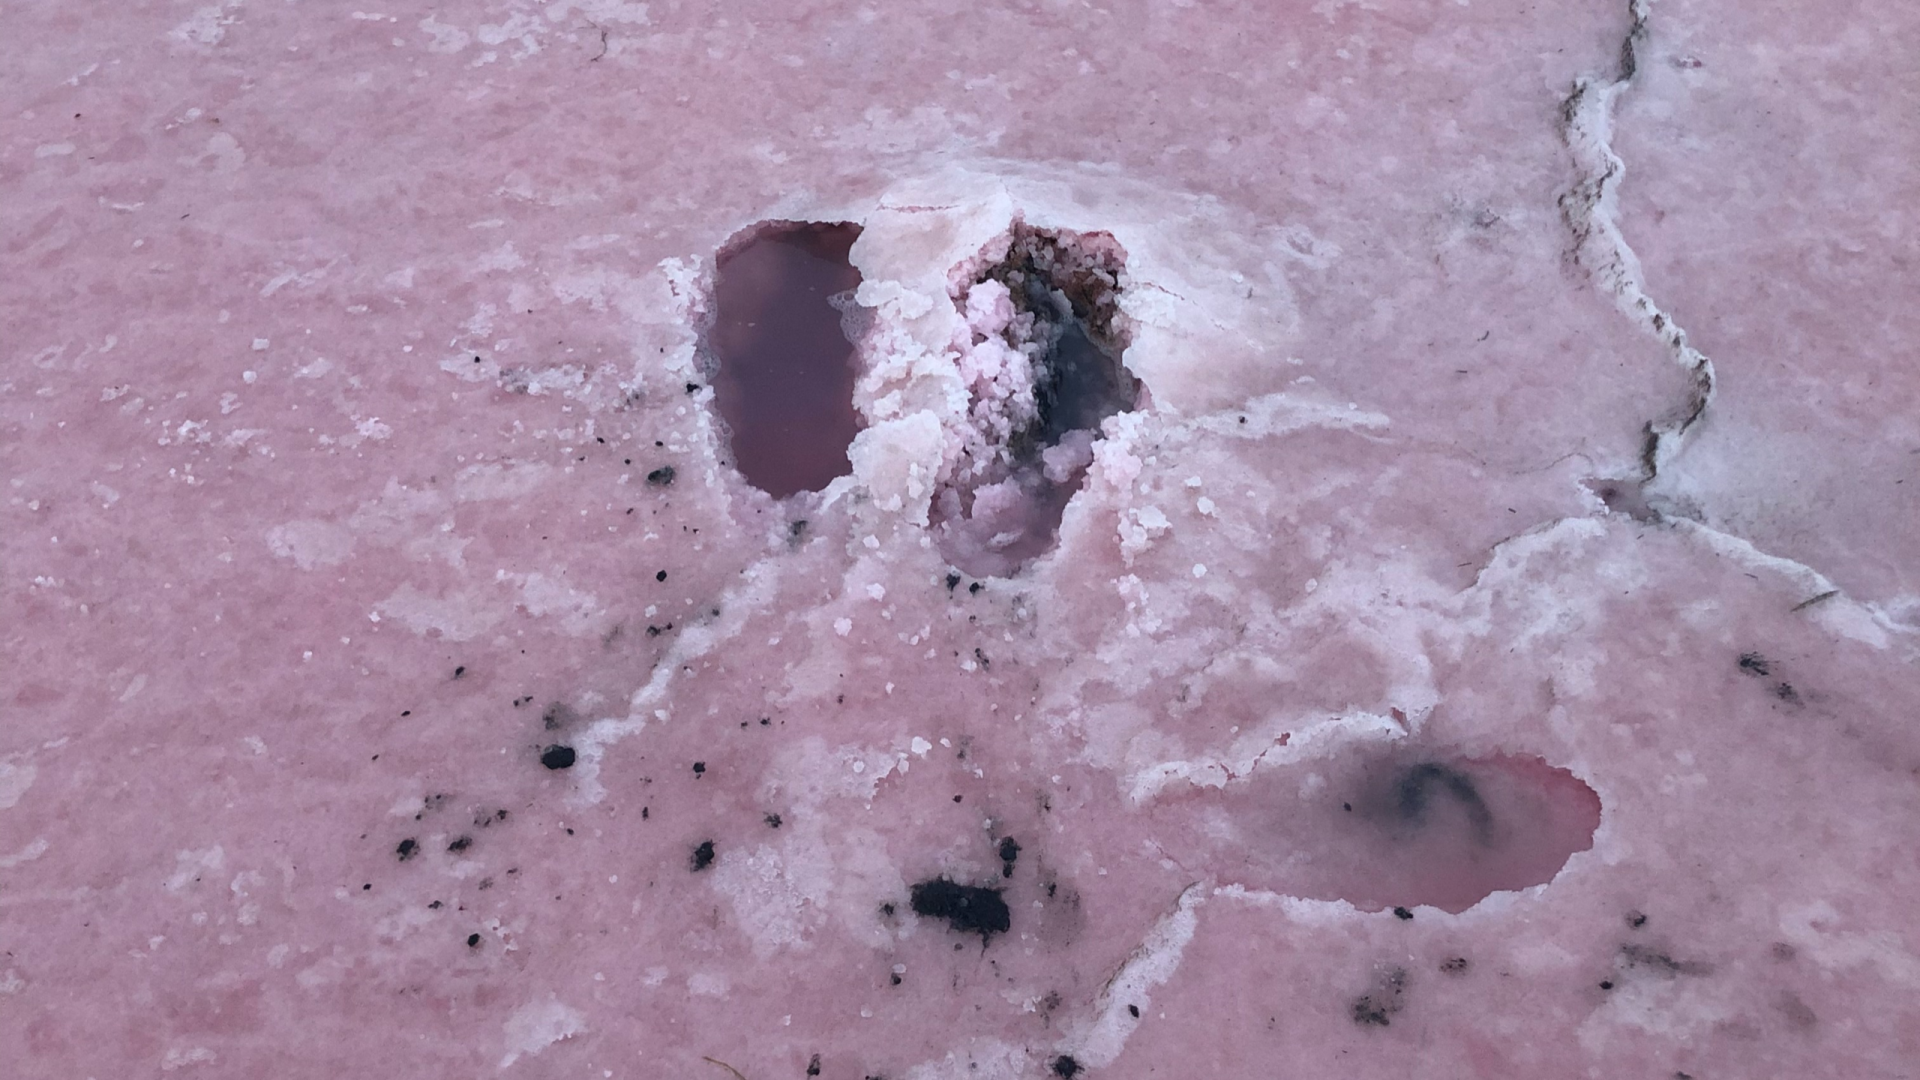 Image of a pink salt crusted surface, with footstep impressions in the surface and cracks and fissures running through the surface.